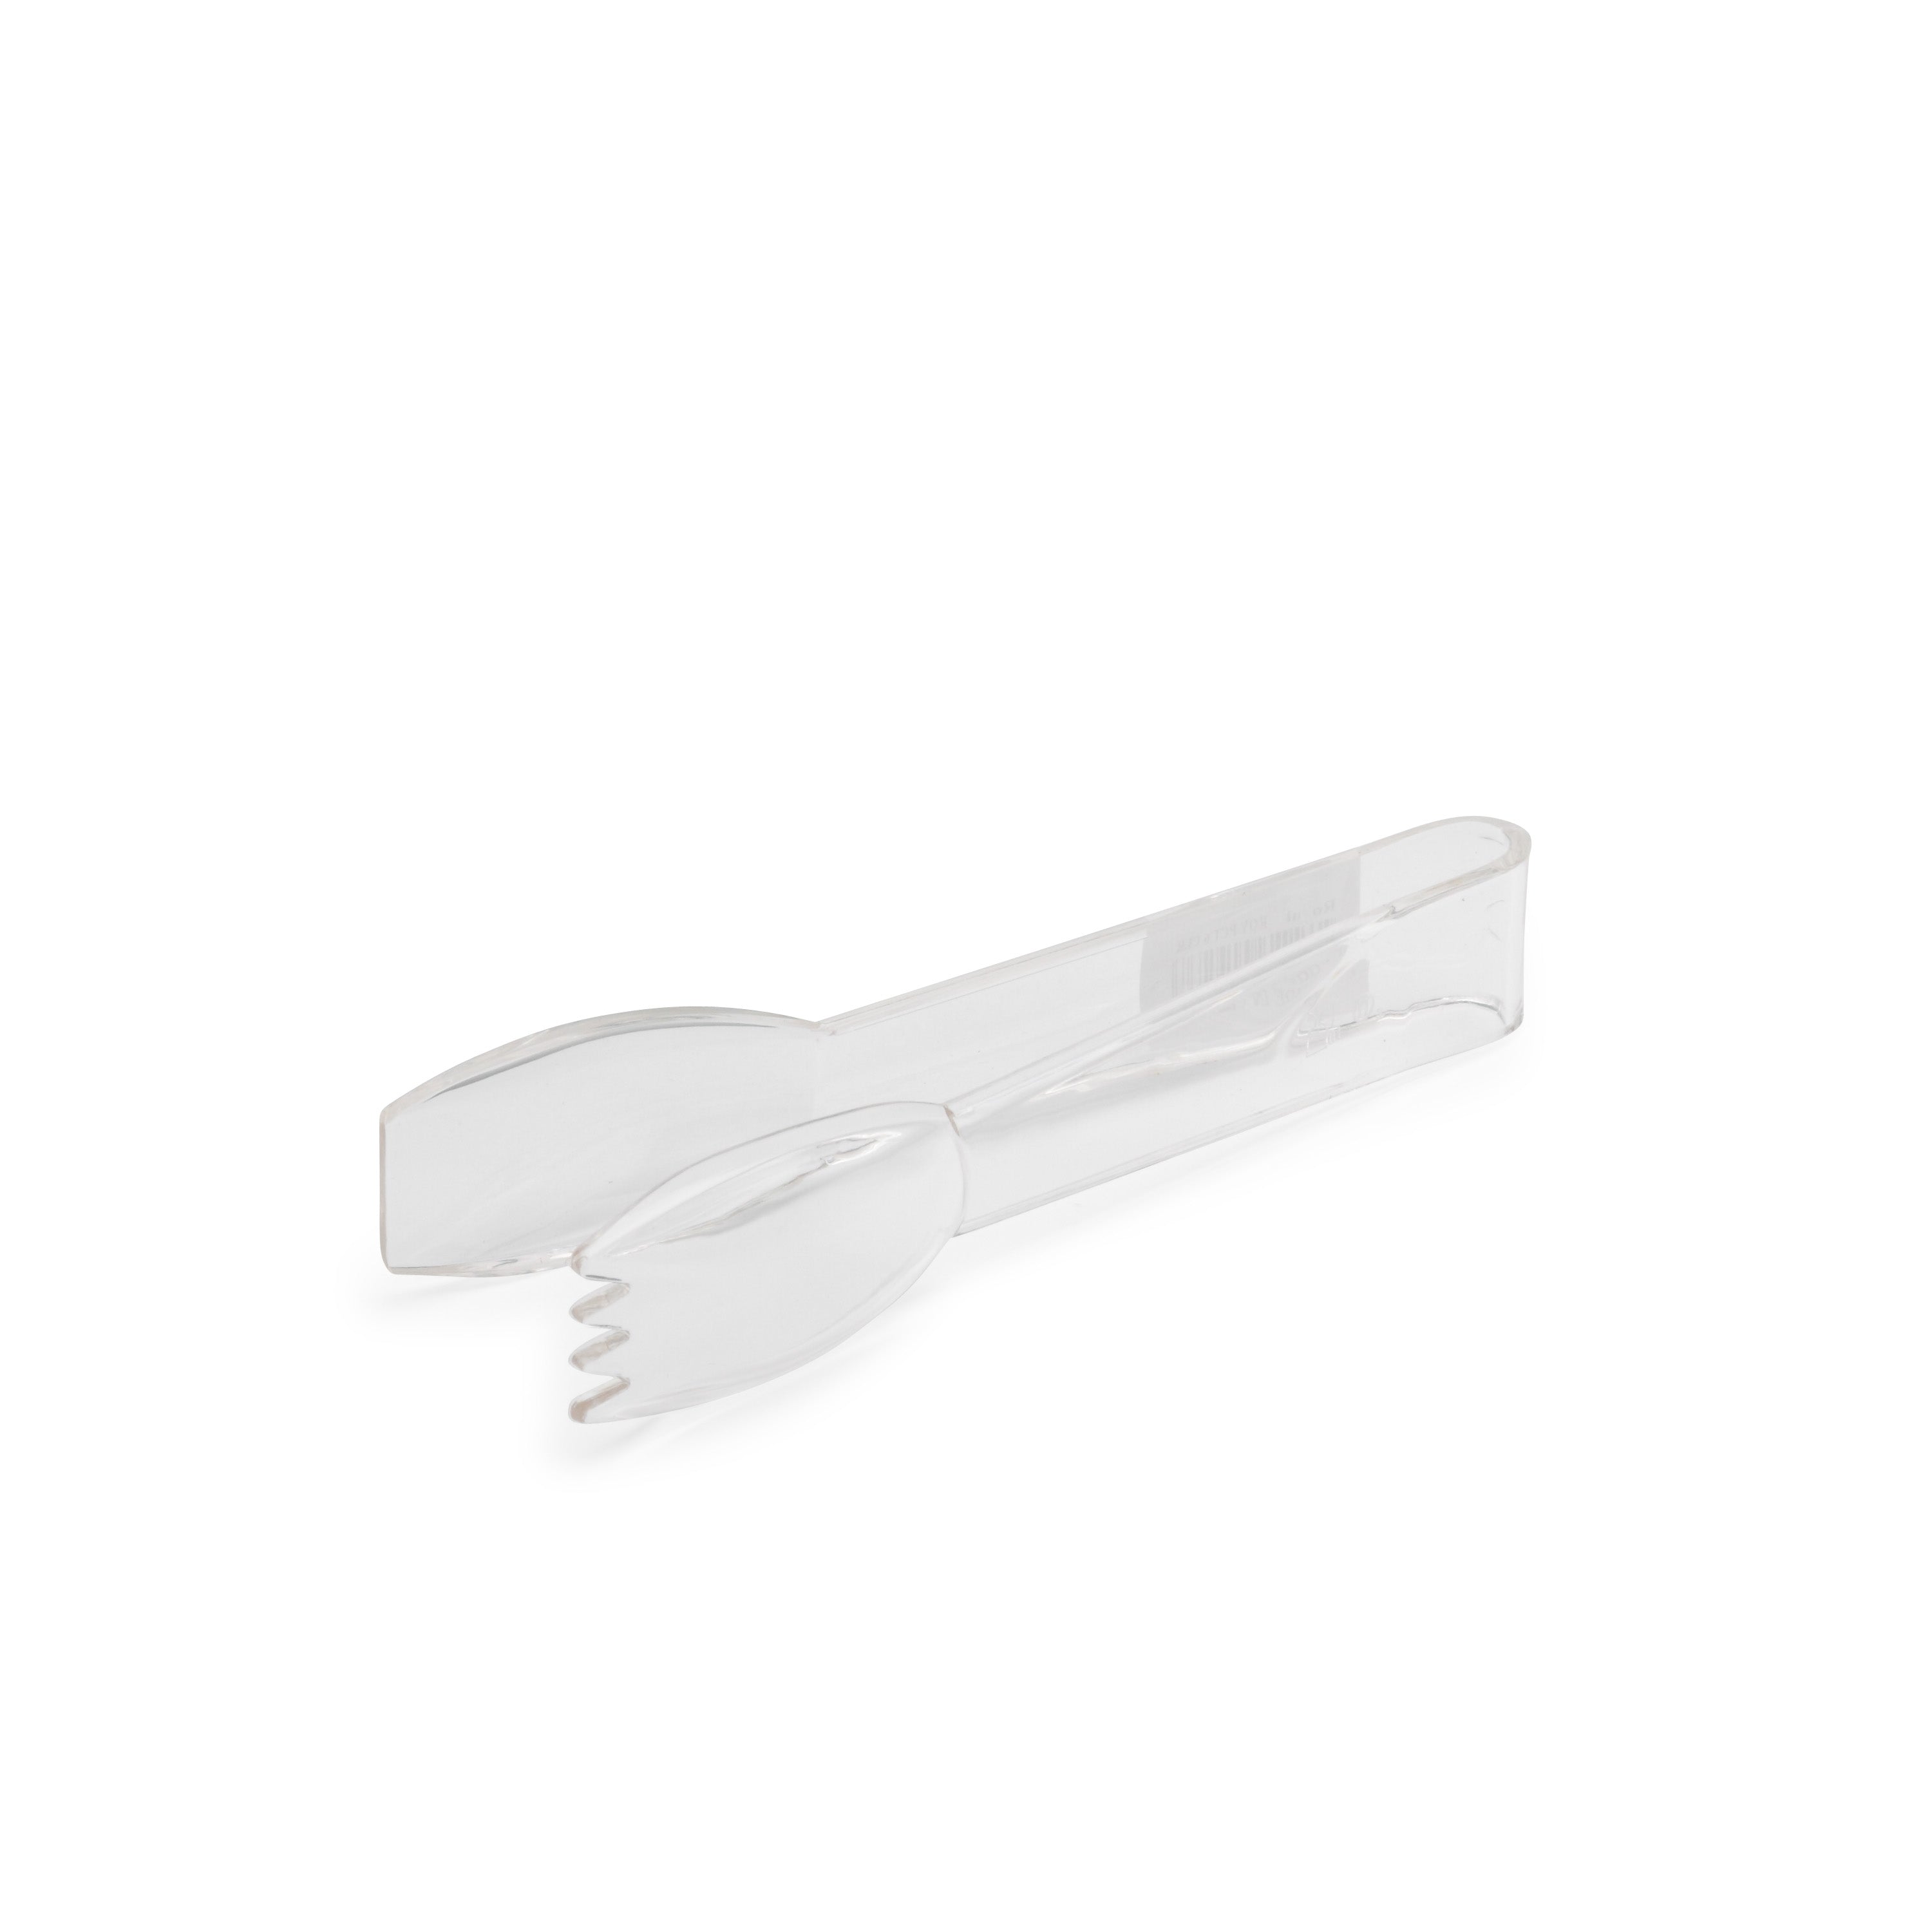 Royal Industries Plastic Utility Tong 6" - 12/Pack